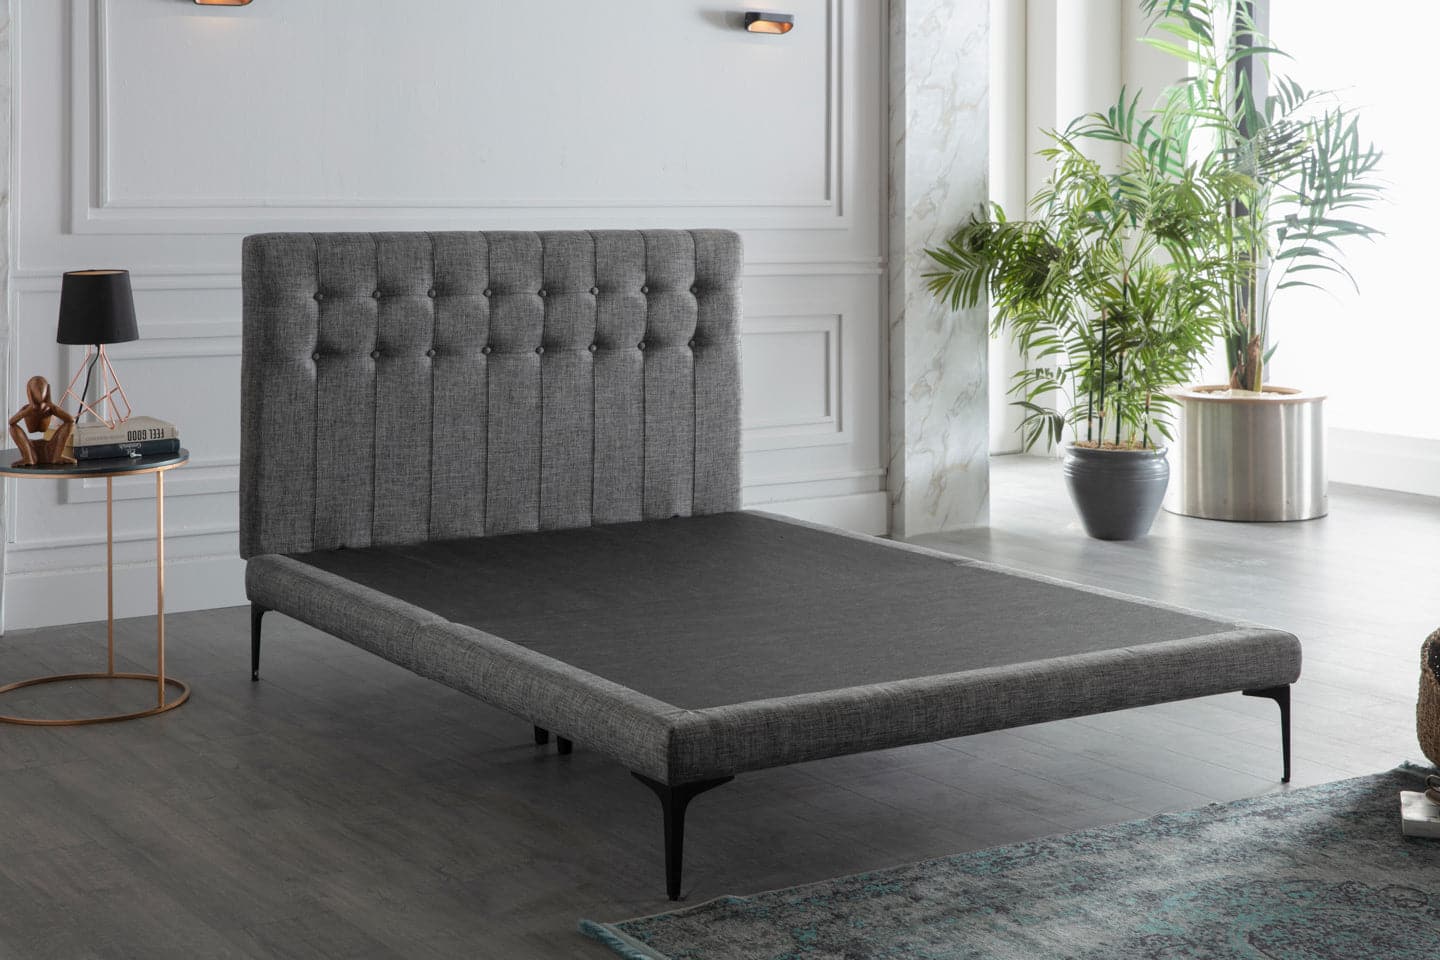 Stratton Bed In A Box by Bellona Twin BELL BASIC GREY